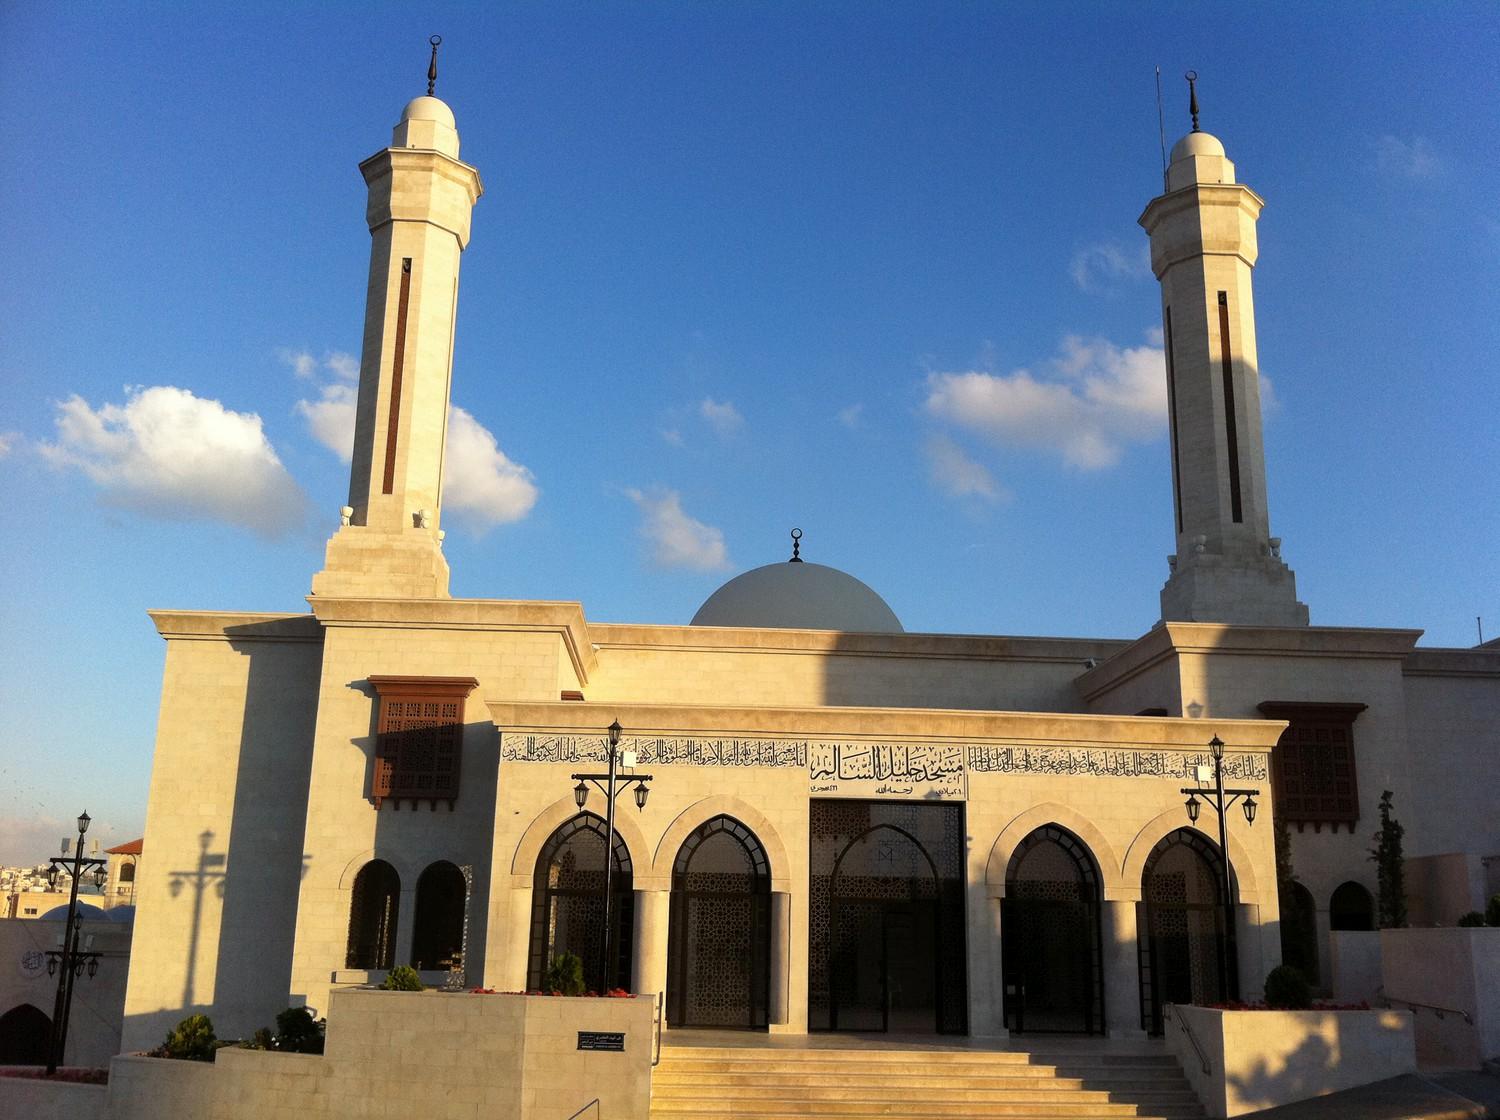 The main Facade of the Khalil Salem Mosque